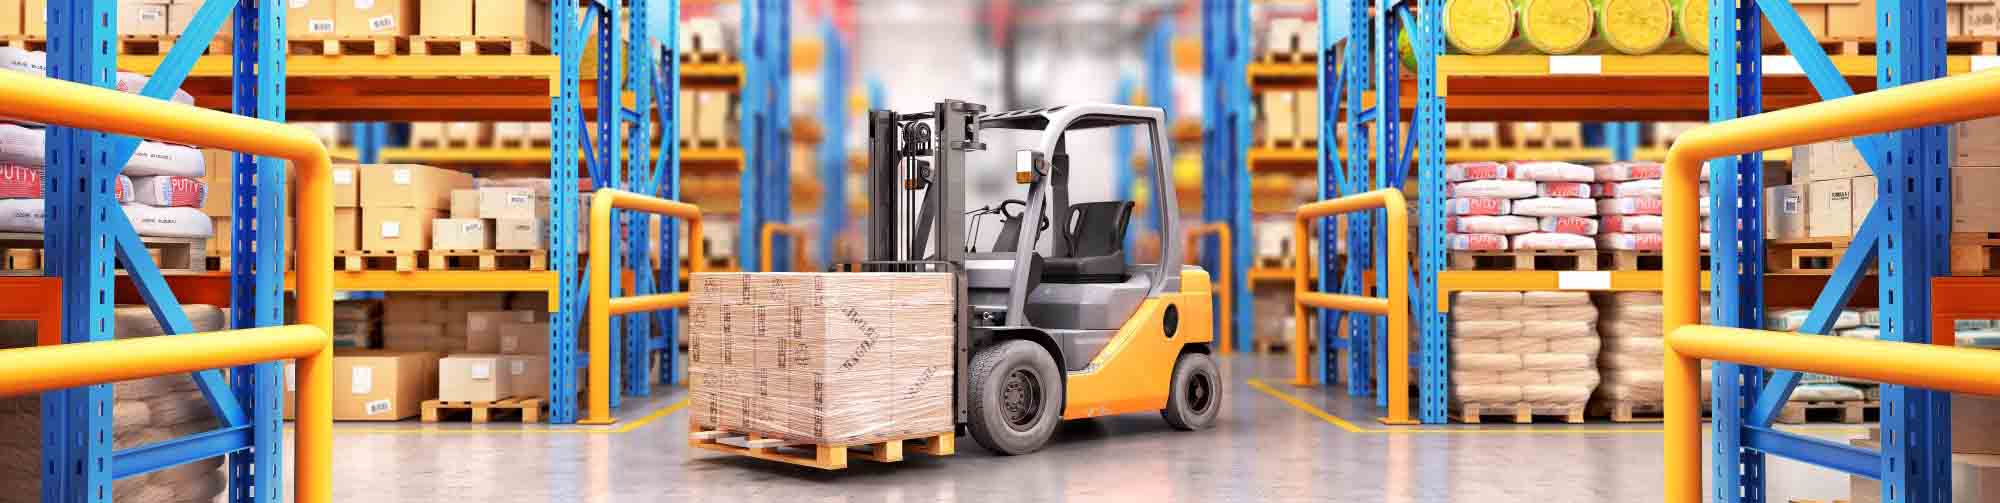 Introduction to Warehouse Health and Safety